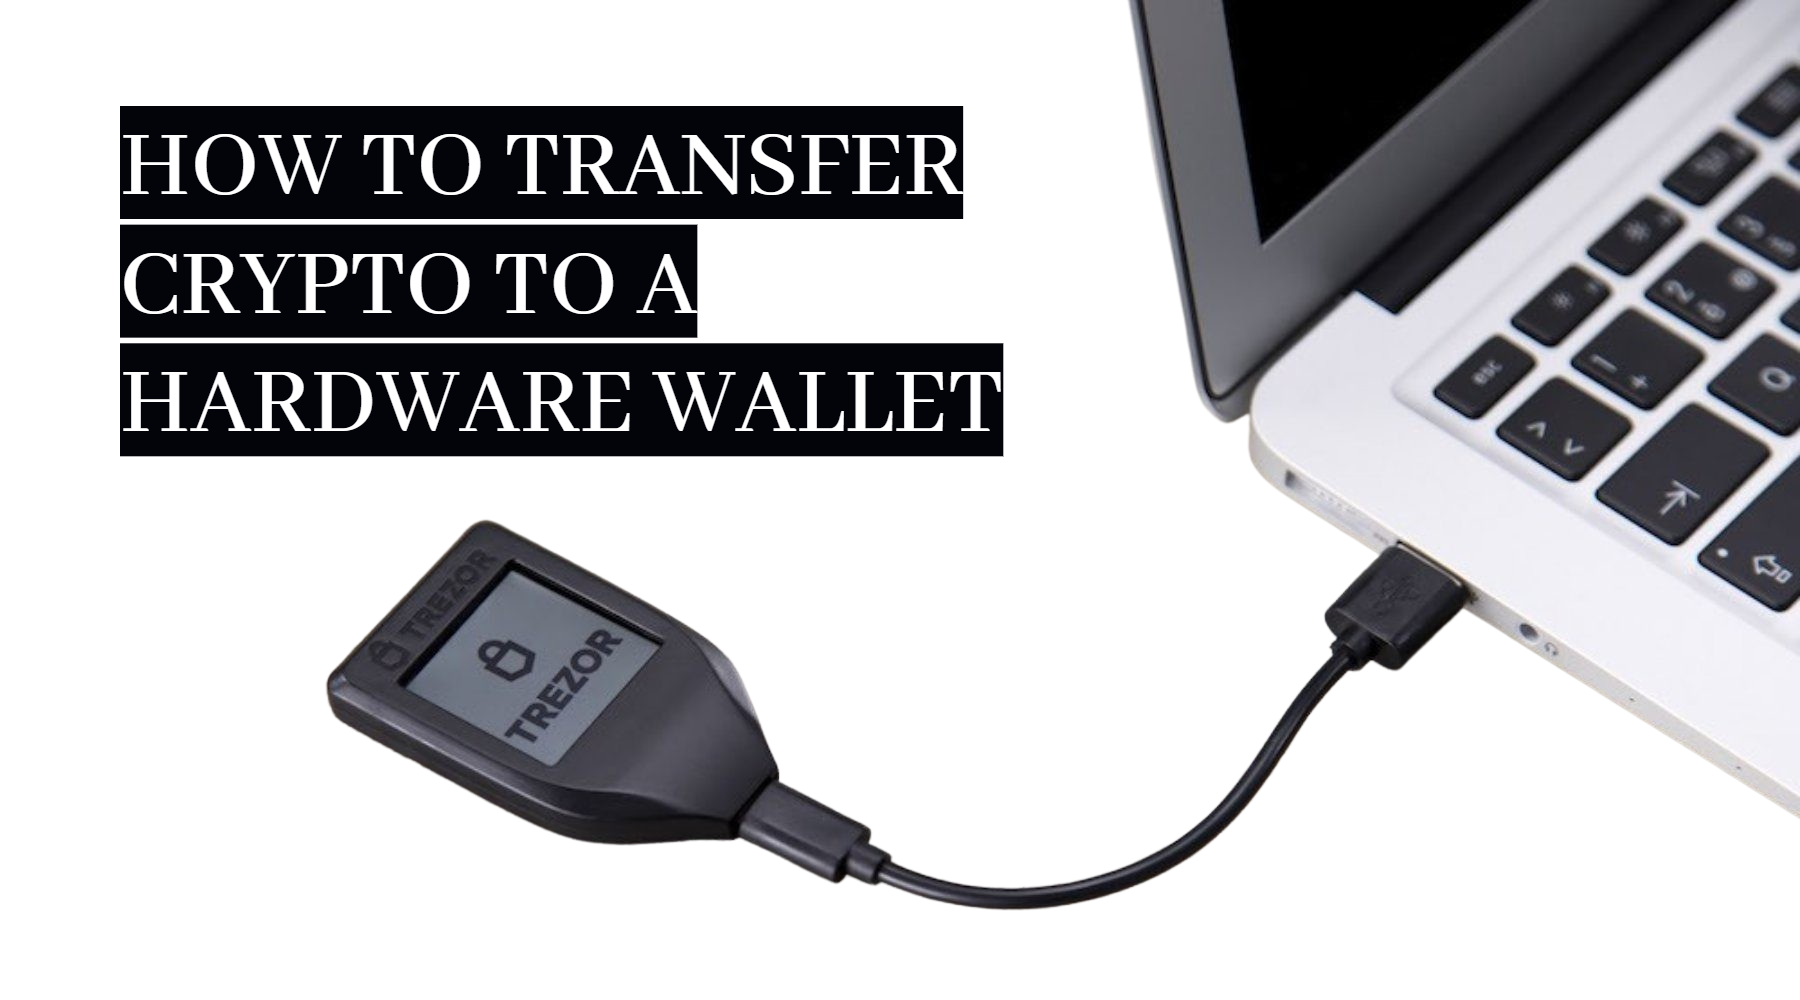 How to transfer crypto to a hardware wallet